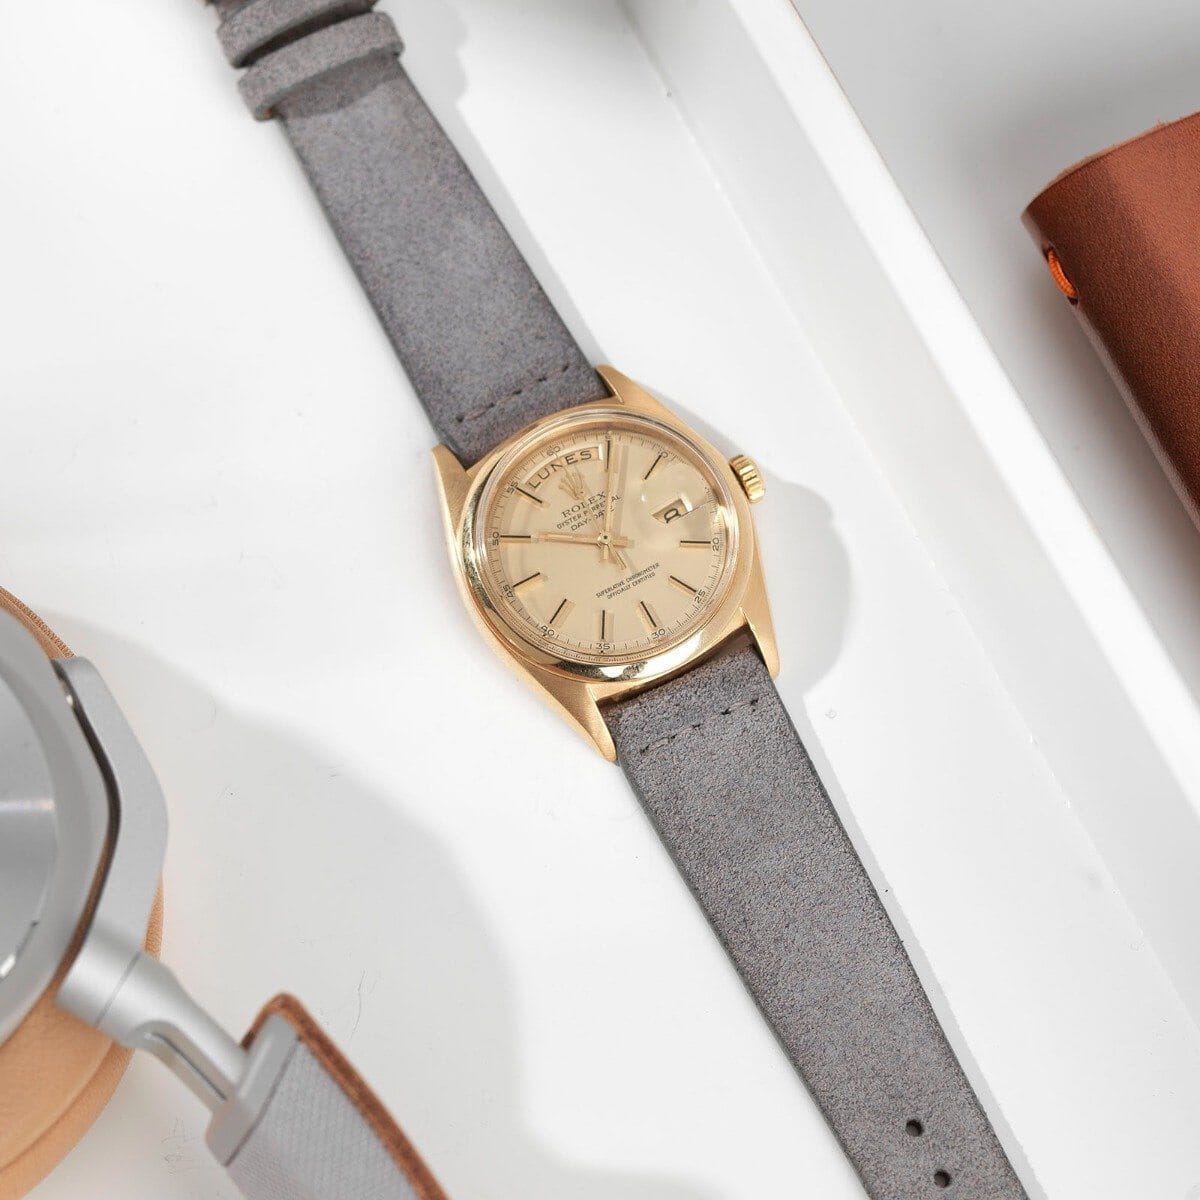 Grey Silky Suede Leather Watch Strap